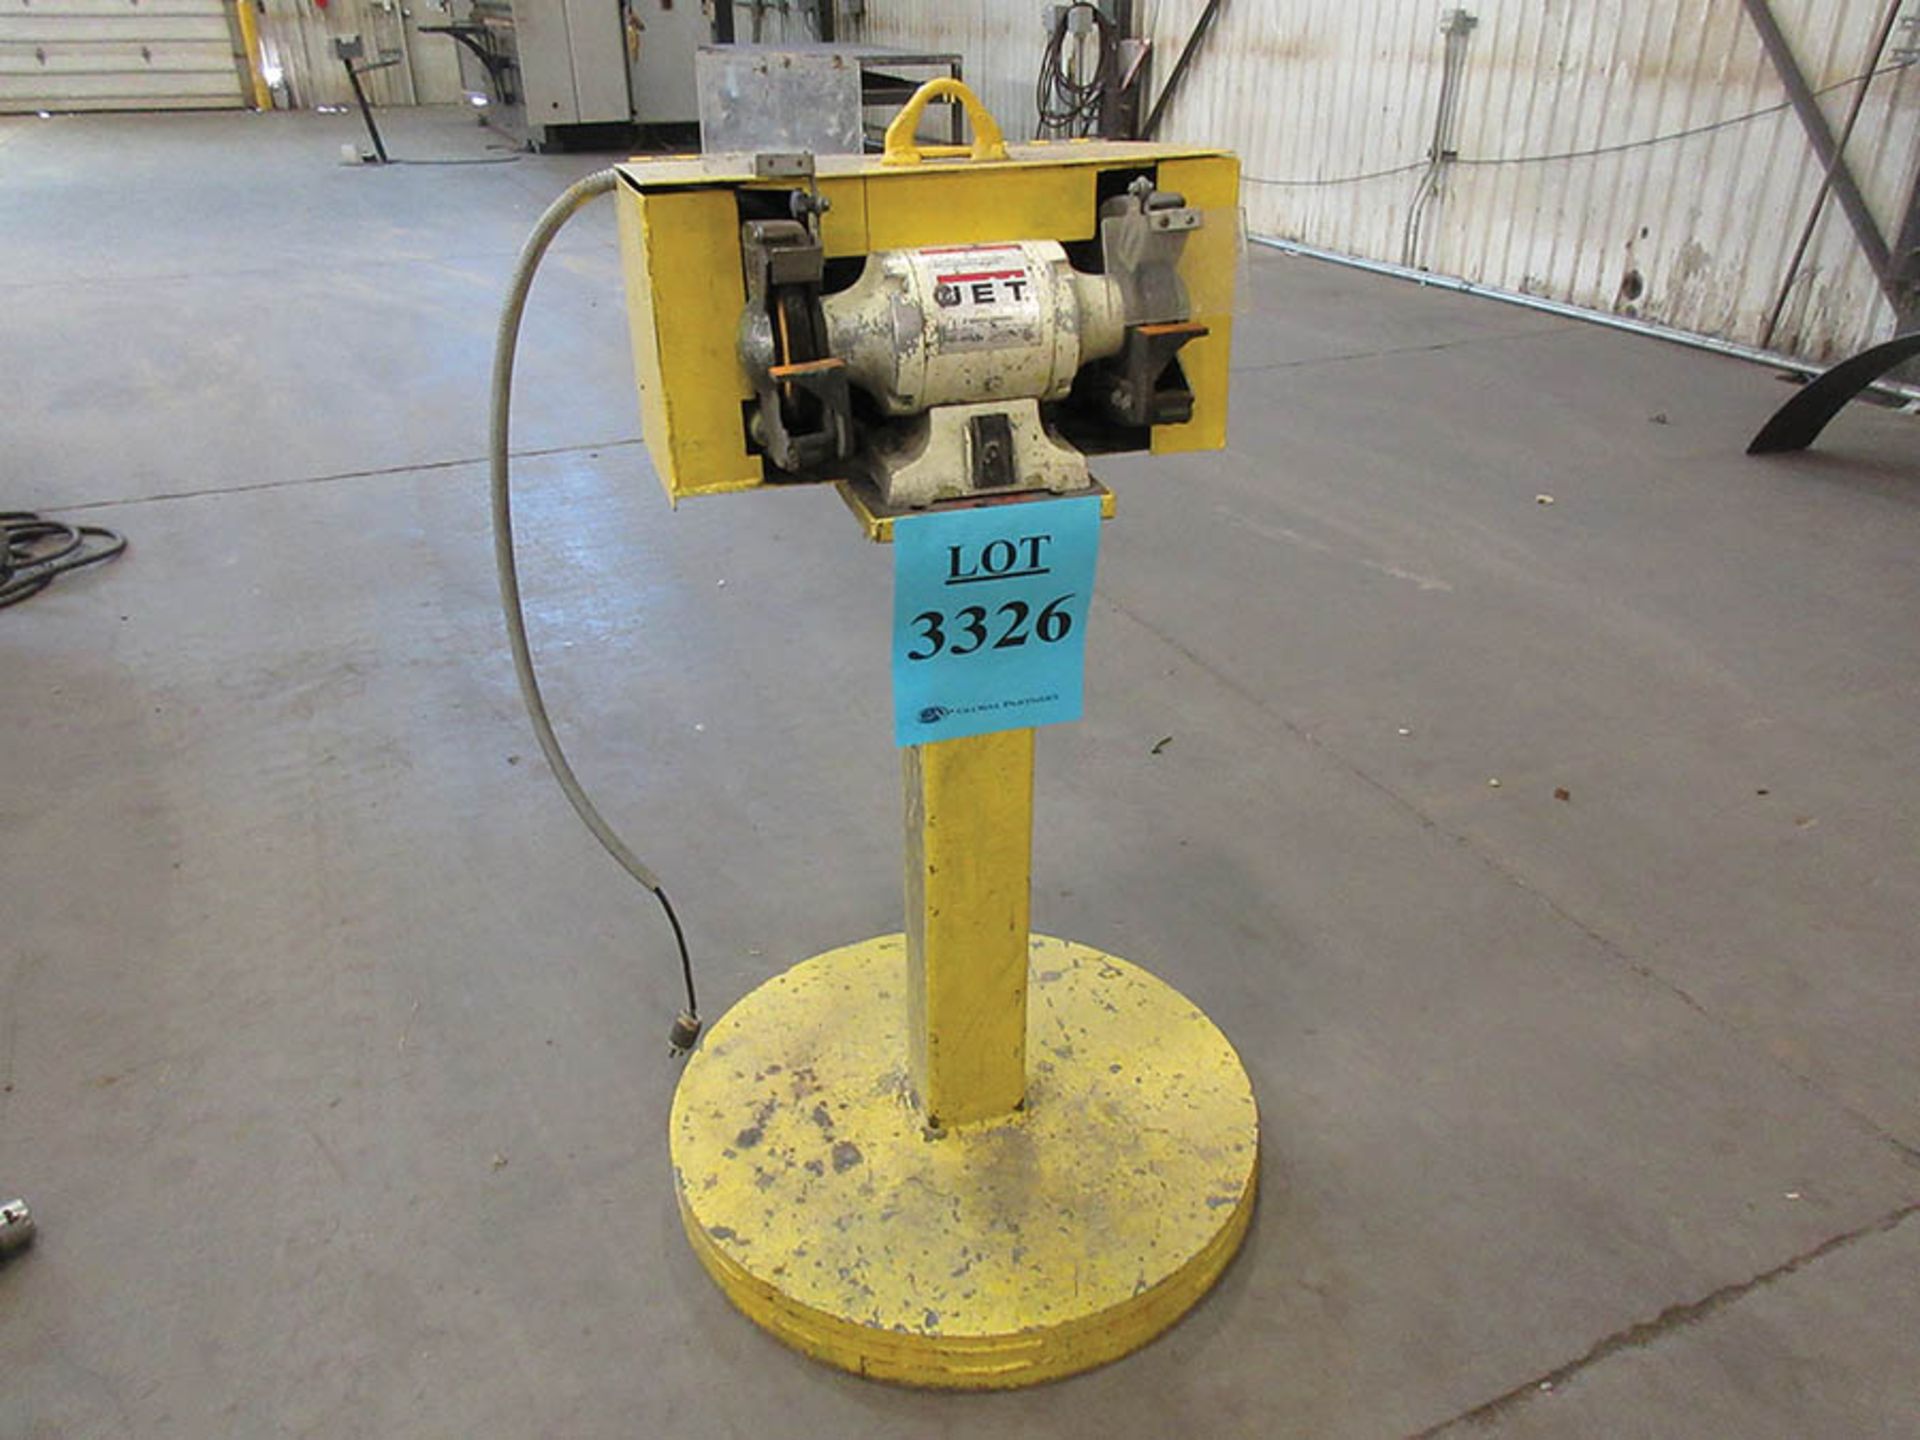 JET 8'' BENCH GRINDER WITH STAND